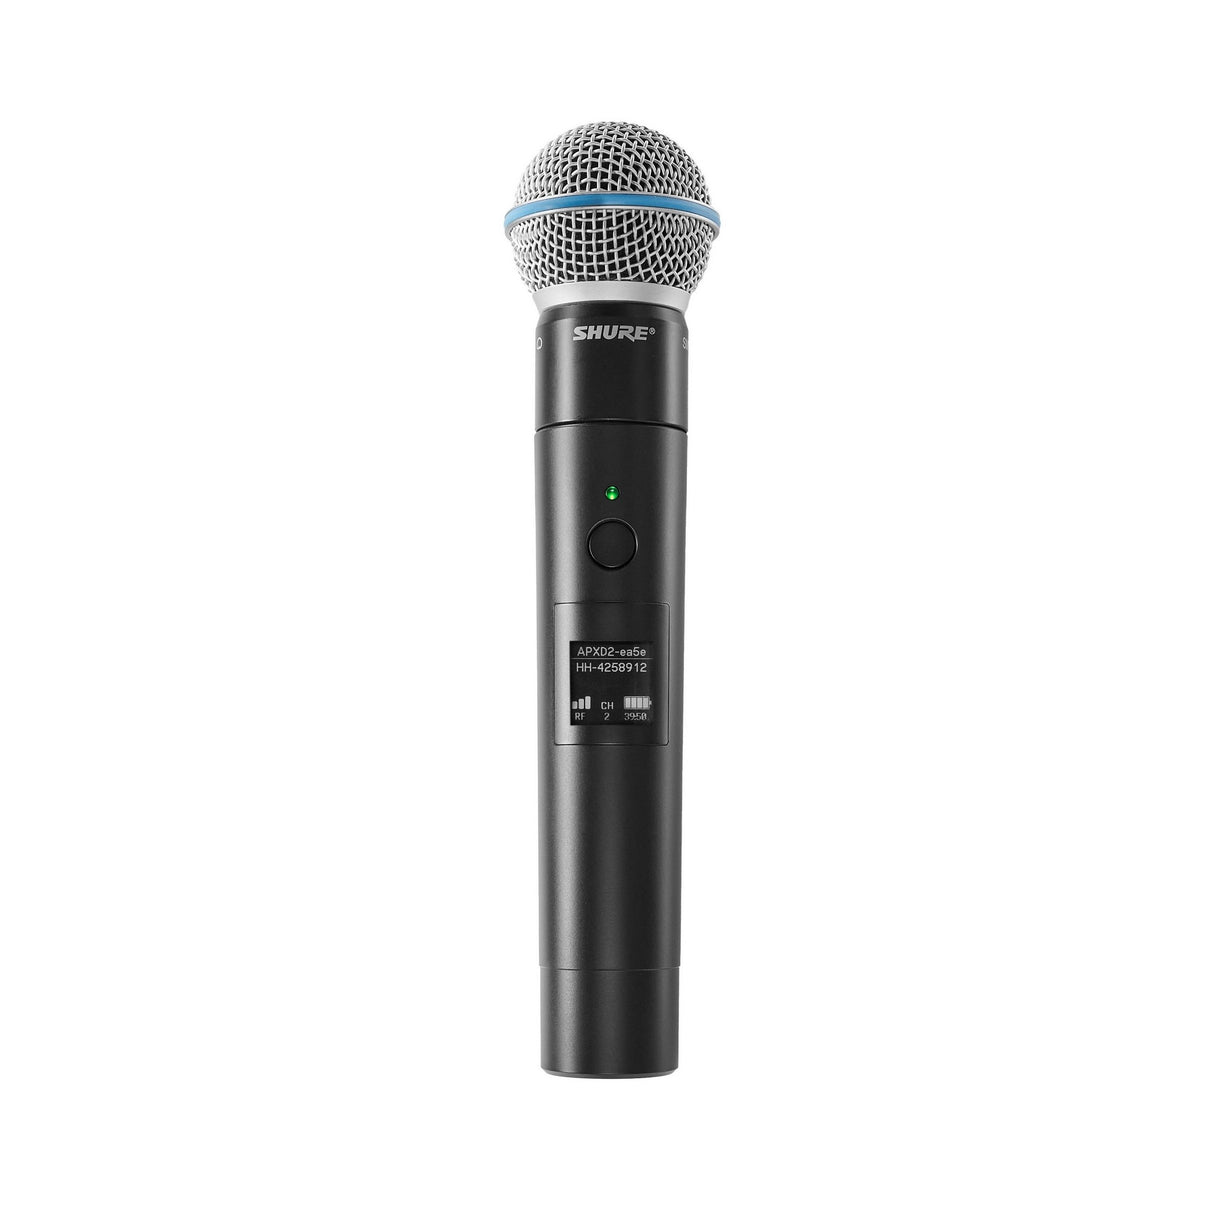 Shure MXW2X/BETA58 Rechargeable Handheld Transmitter with Beta58 Capsule for MXW neXt 2 Systems, Z10 1920-1930 MHz